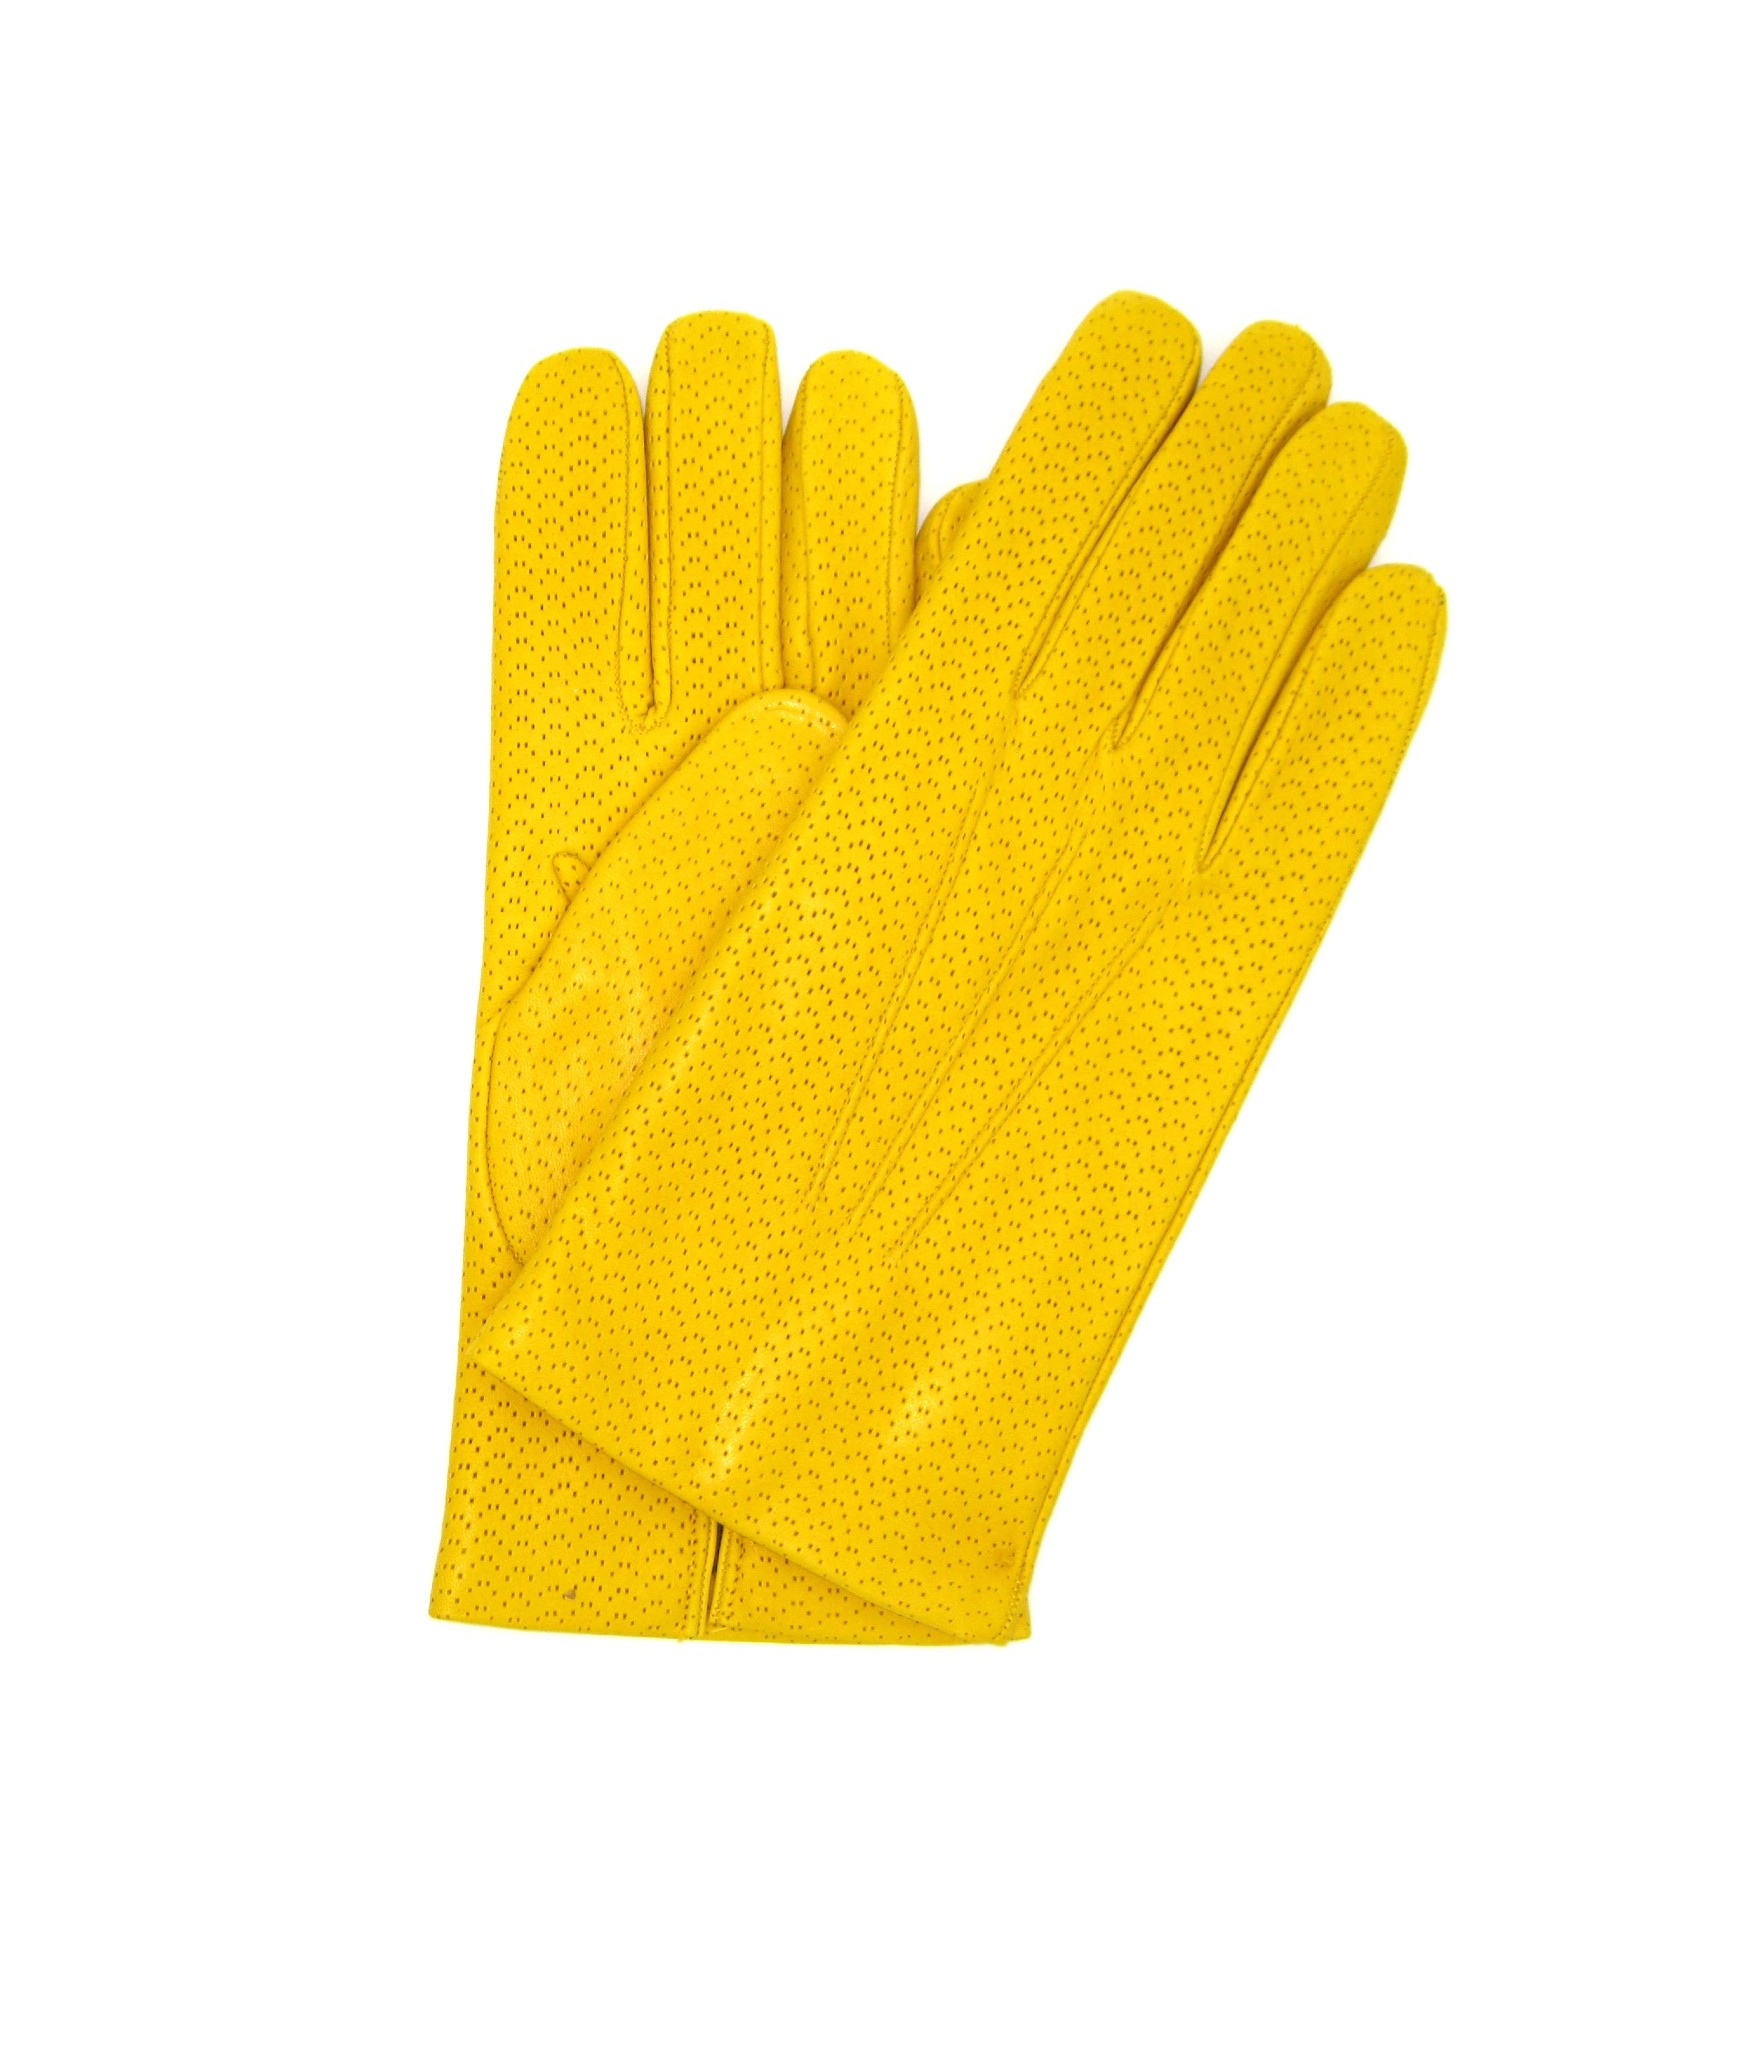 Uomo Easy Going Nappa leather gloves 2bt ,cashmere lined Yellow